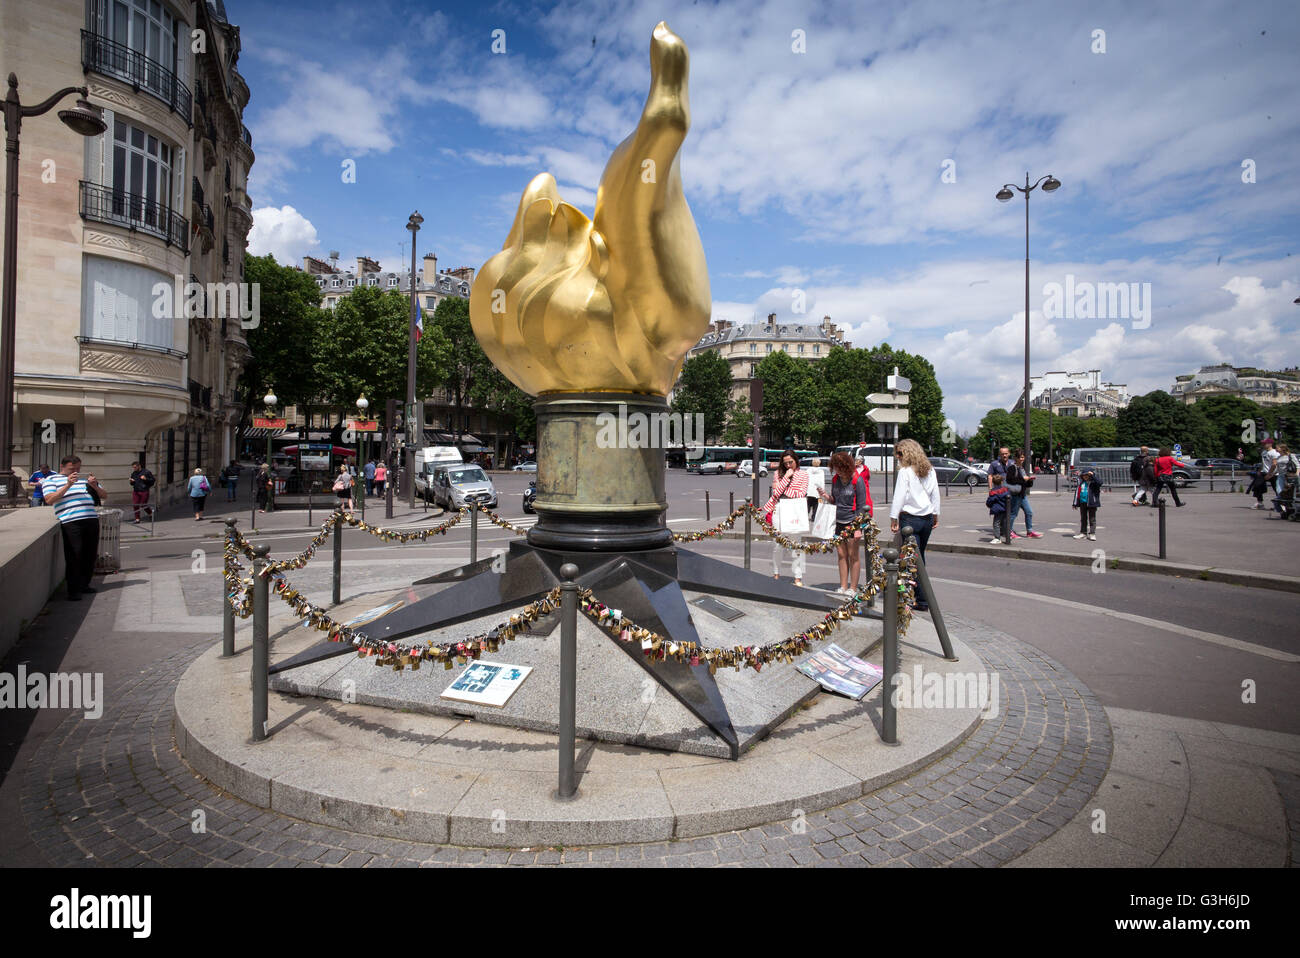 Paris, France. 19th May, 2016. Tourists stand on the square of Pont d'Alma (bridge of souls) in Paris, France, 19 May 2016. Princess Diana's fatal accident happened here on 31 August 1997 and ever since the site of the accident has become a pilgrimage site for Paris tourists. Photo: Peter Kneffel/dpa/Alamy Live News Stock Photo